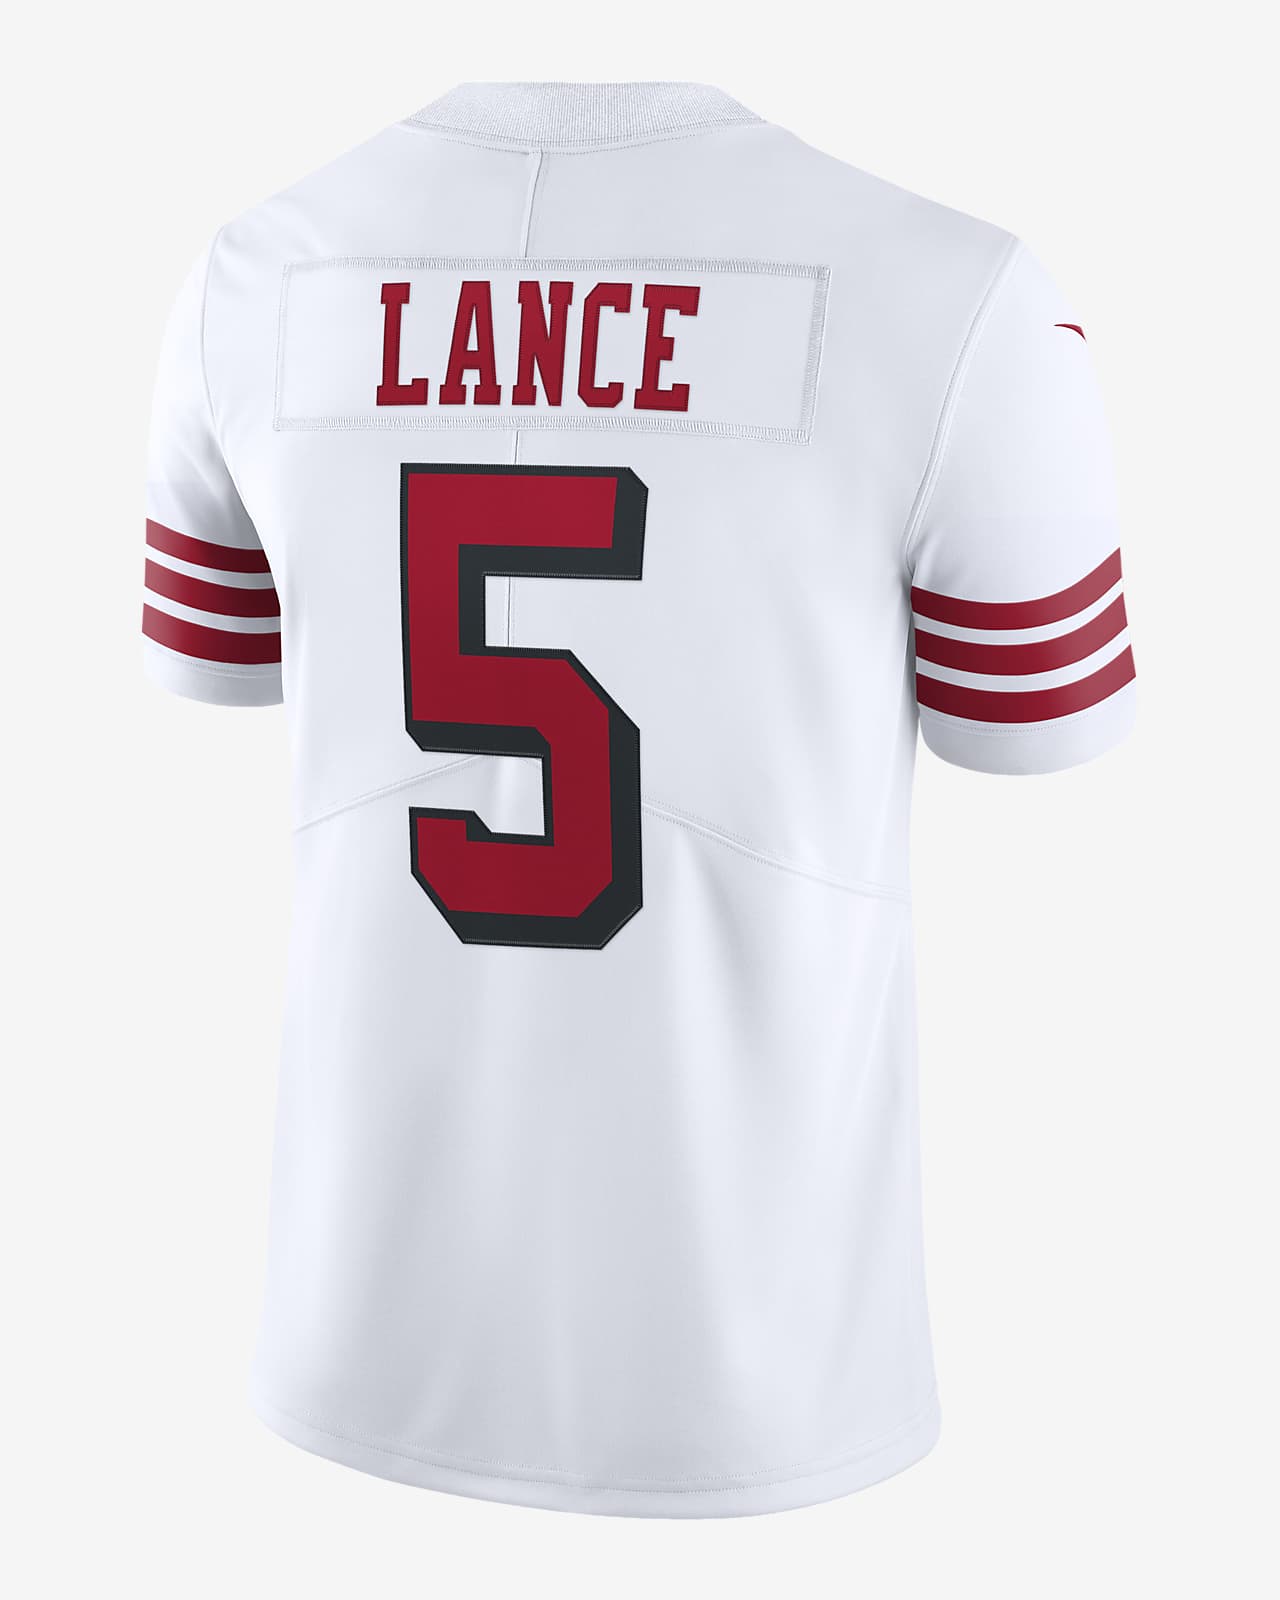 49ers number 7 jersey